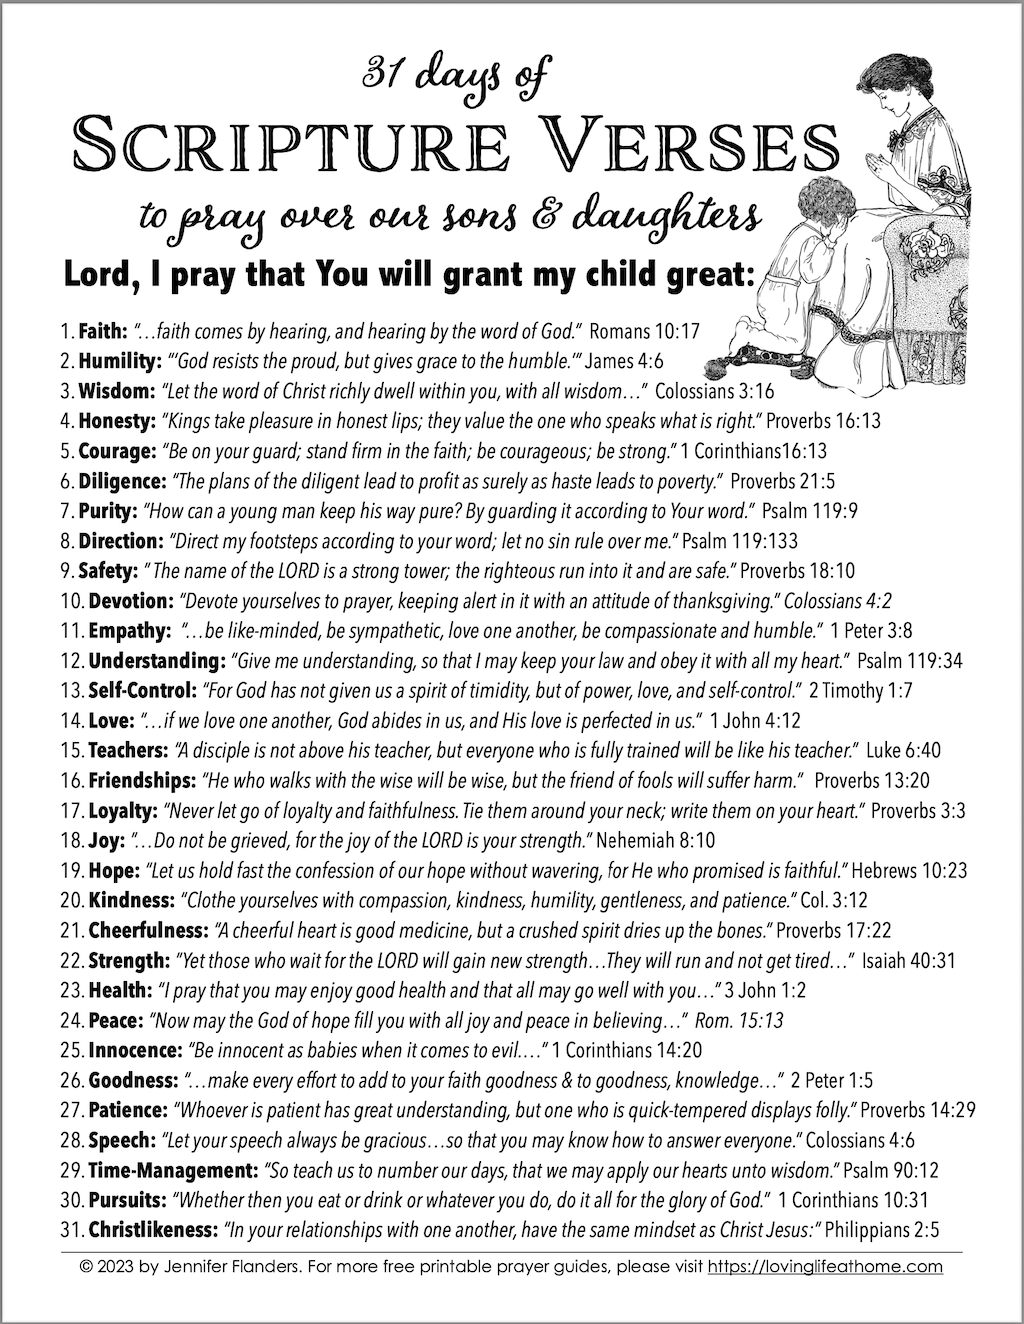 31 Days of Scripture to Pray for Your Children